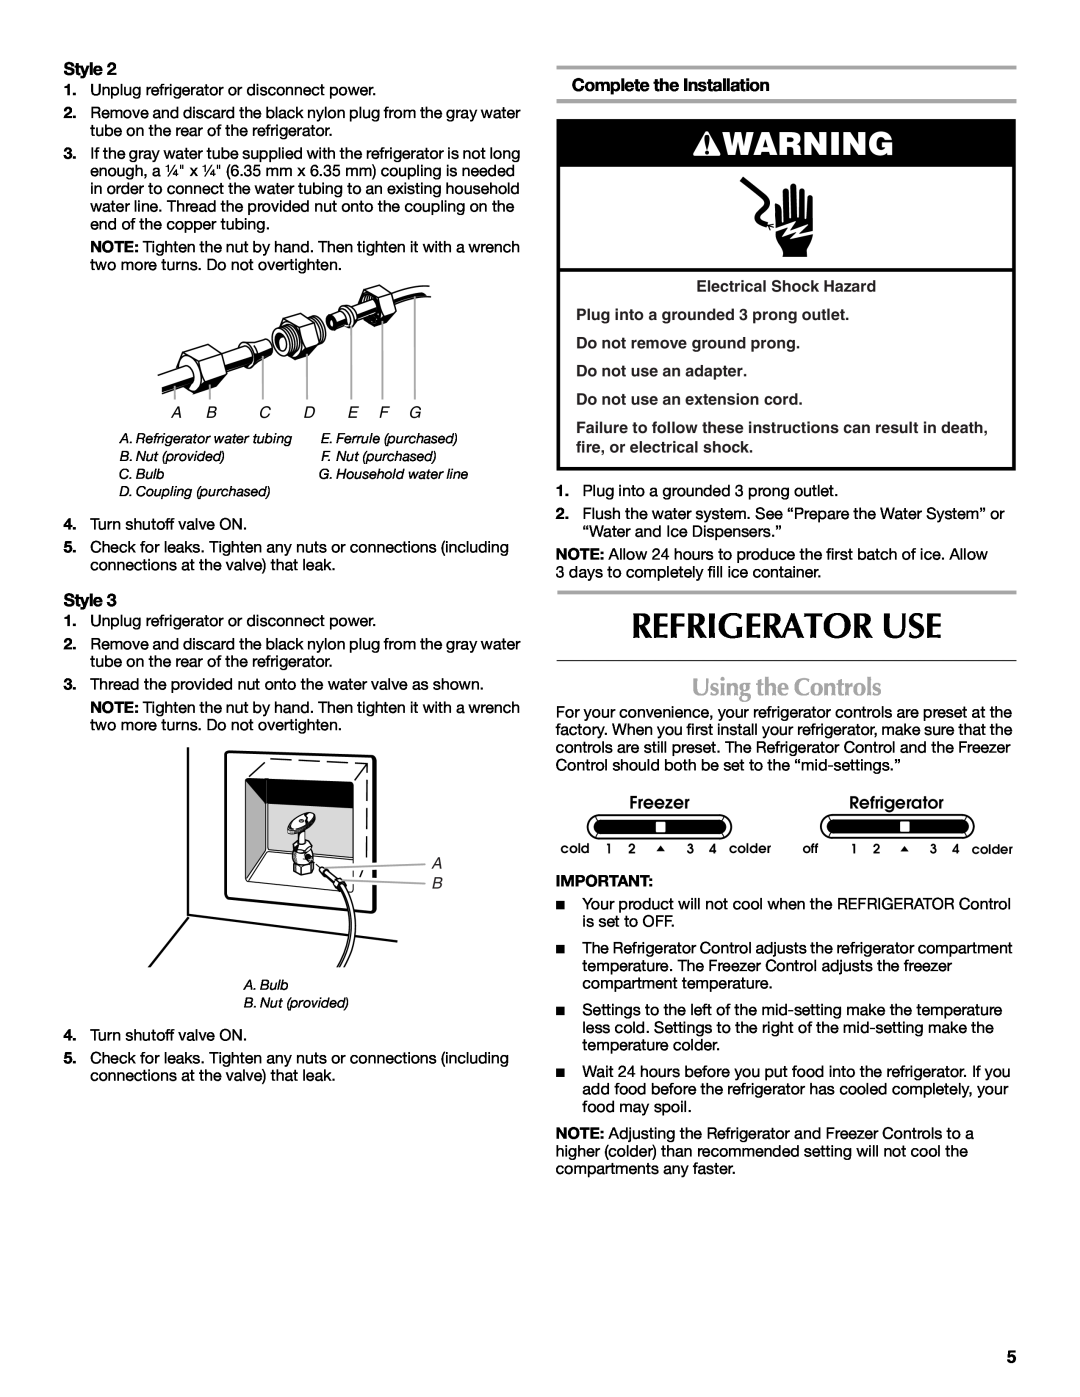 Maytag W10237807A Refrigerator Use, Using the Controls, Style, Complete the Installation, E F G, Electrical Shock Hazard 